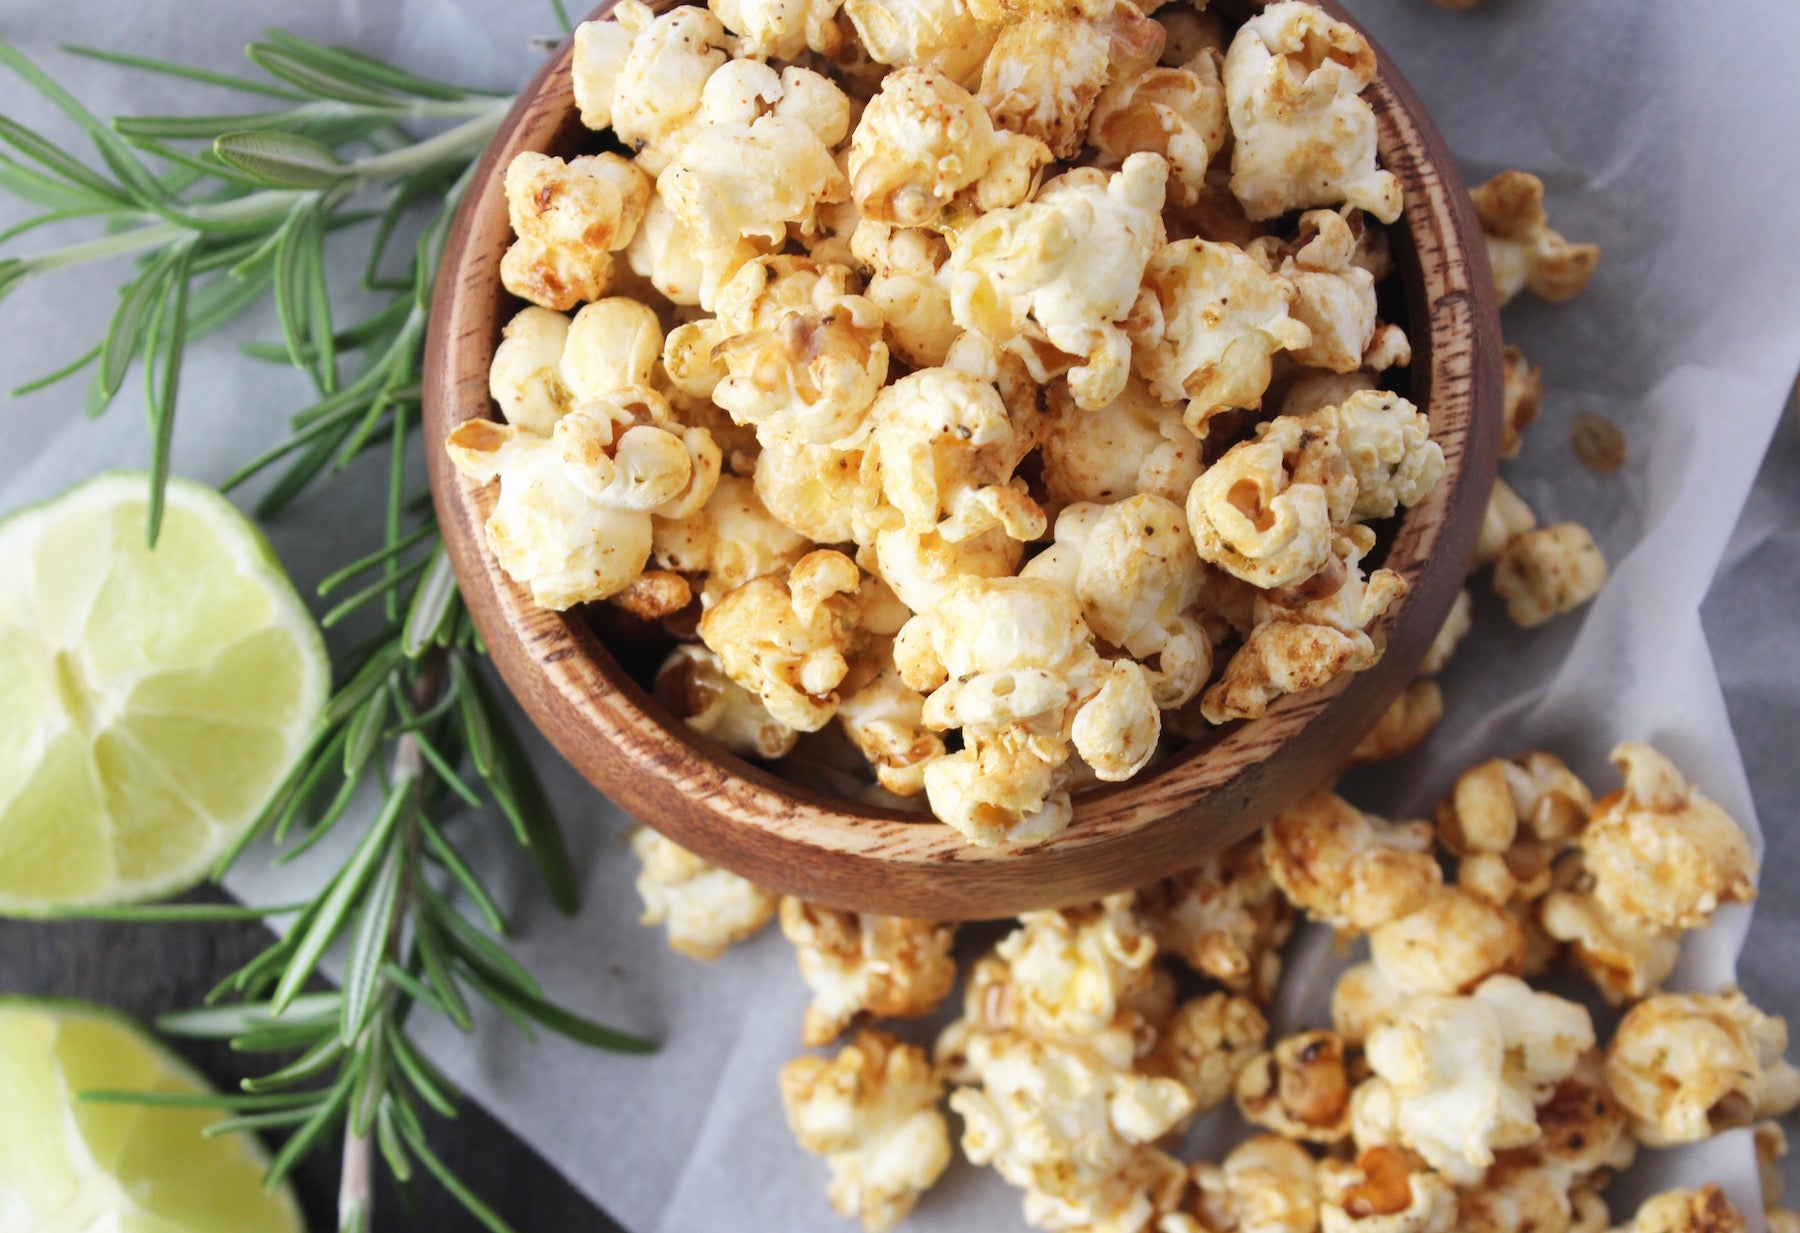 ▷ Sweet and Spicy: American Popcorn Recipe!